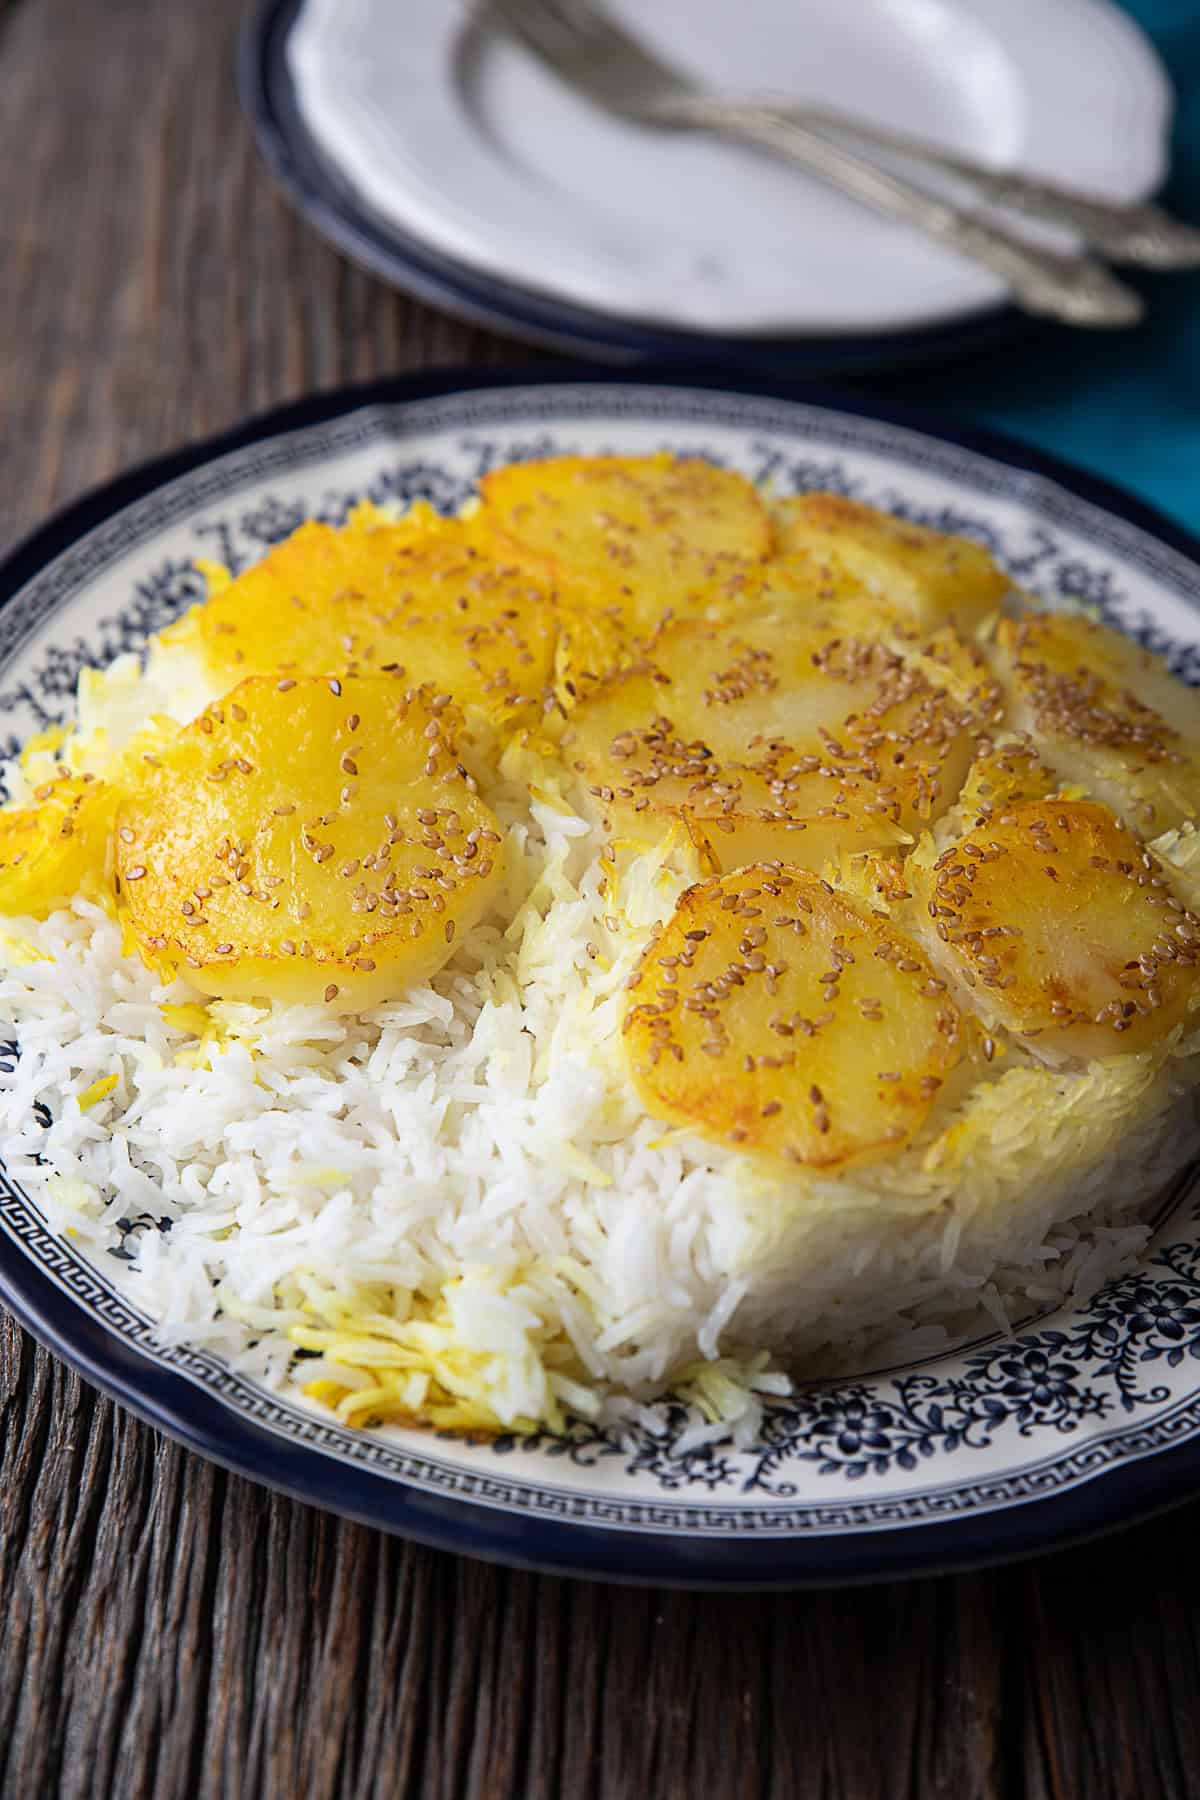 A delicious serving of Persian potato tahdig: Crispy golden potato slices layered over aromatic saffron rice, showcasing the traditional Iranian culinary artistry.